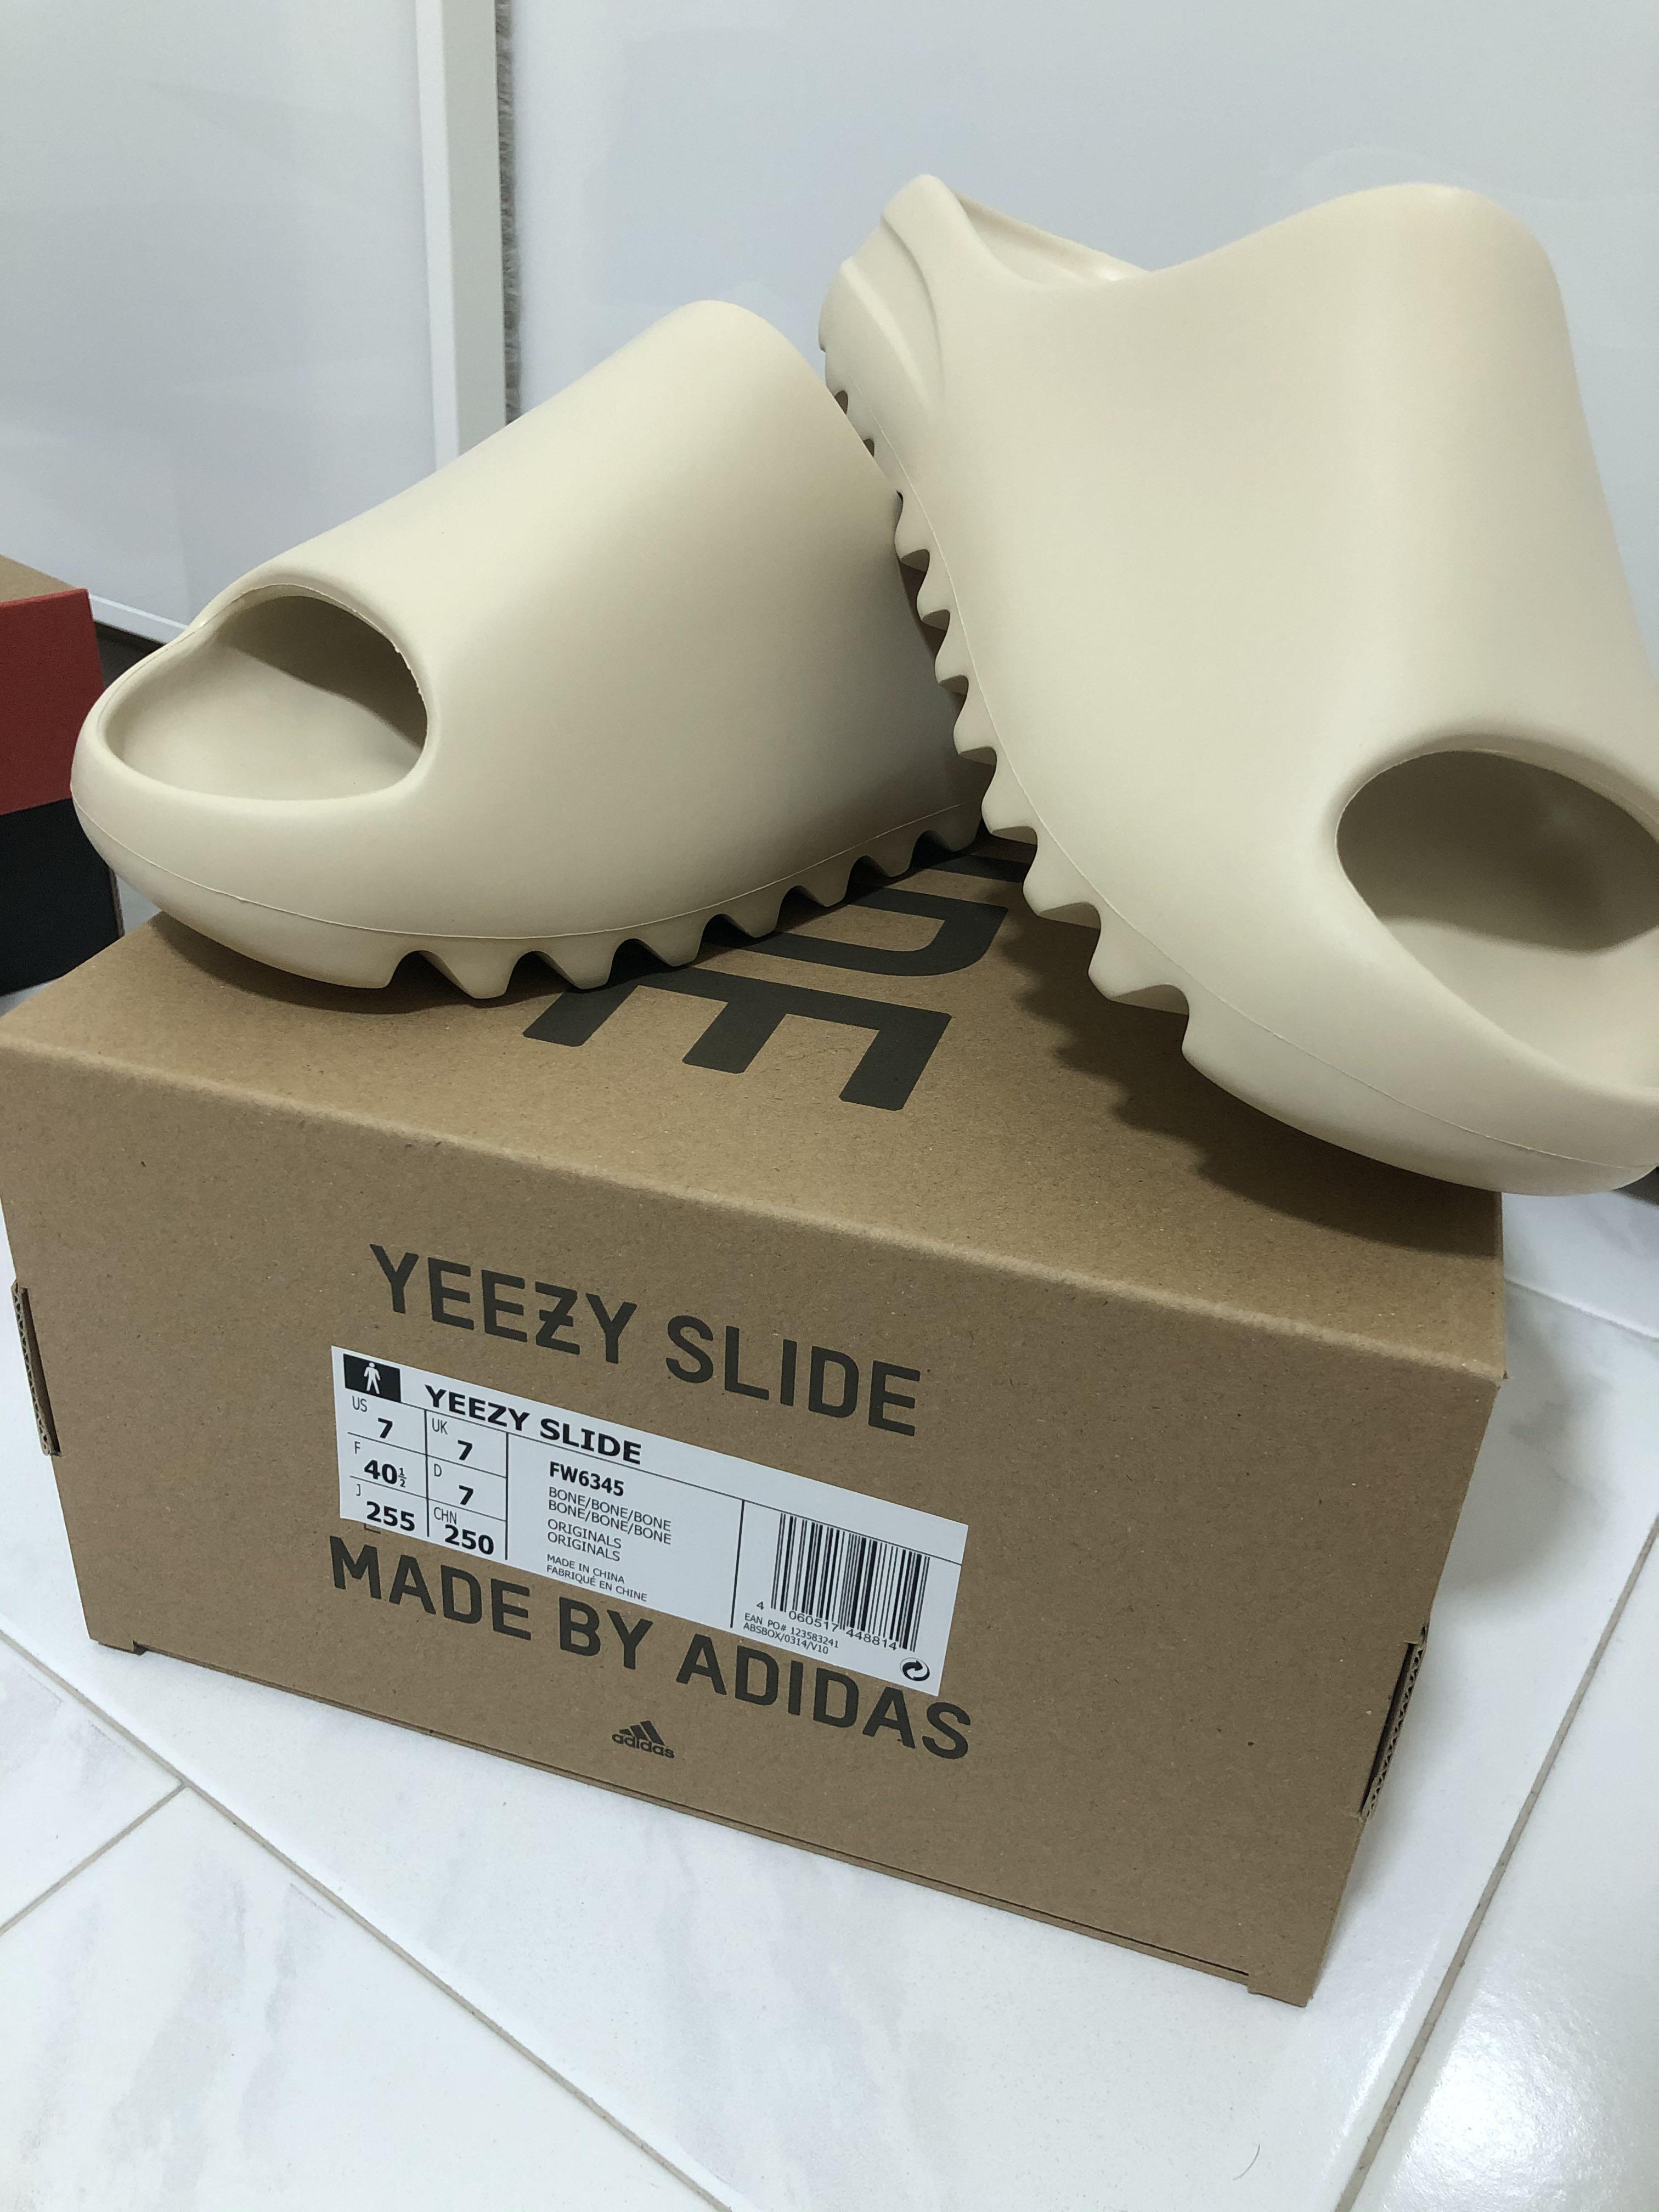 Yeezy adult slides made by adidas nwt in 2020 Handmade.